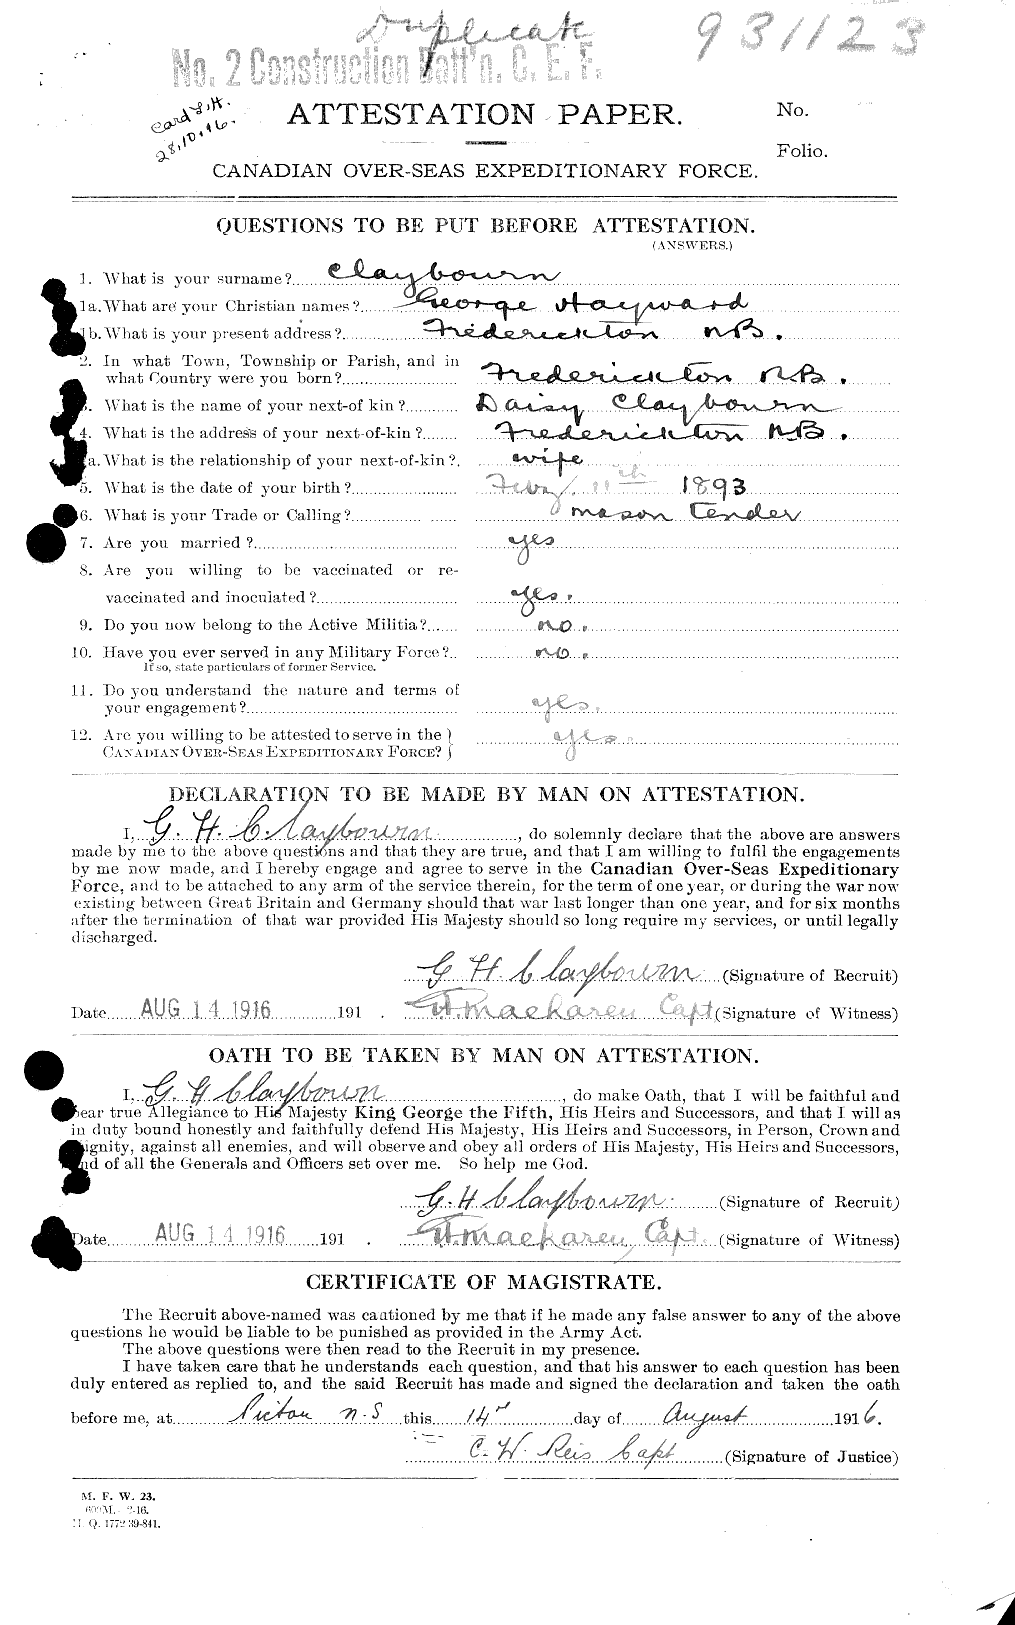 Personnel Records of the First World War - CEF 019227a